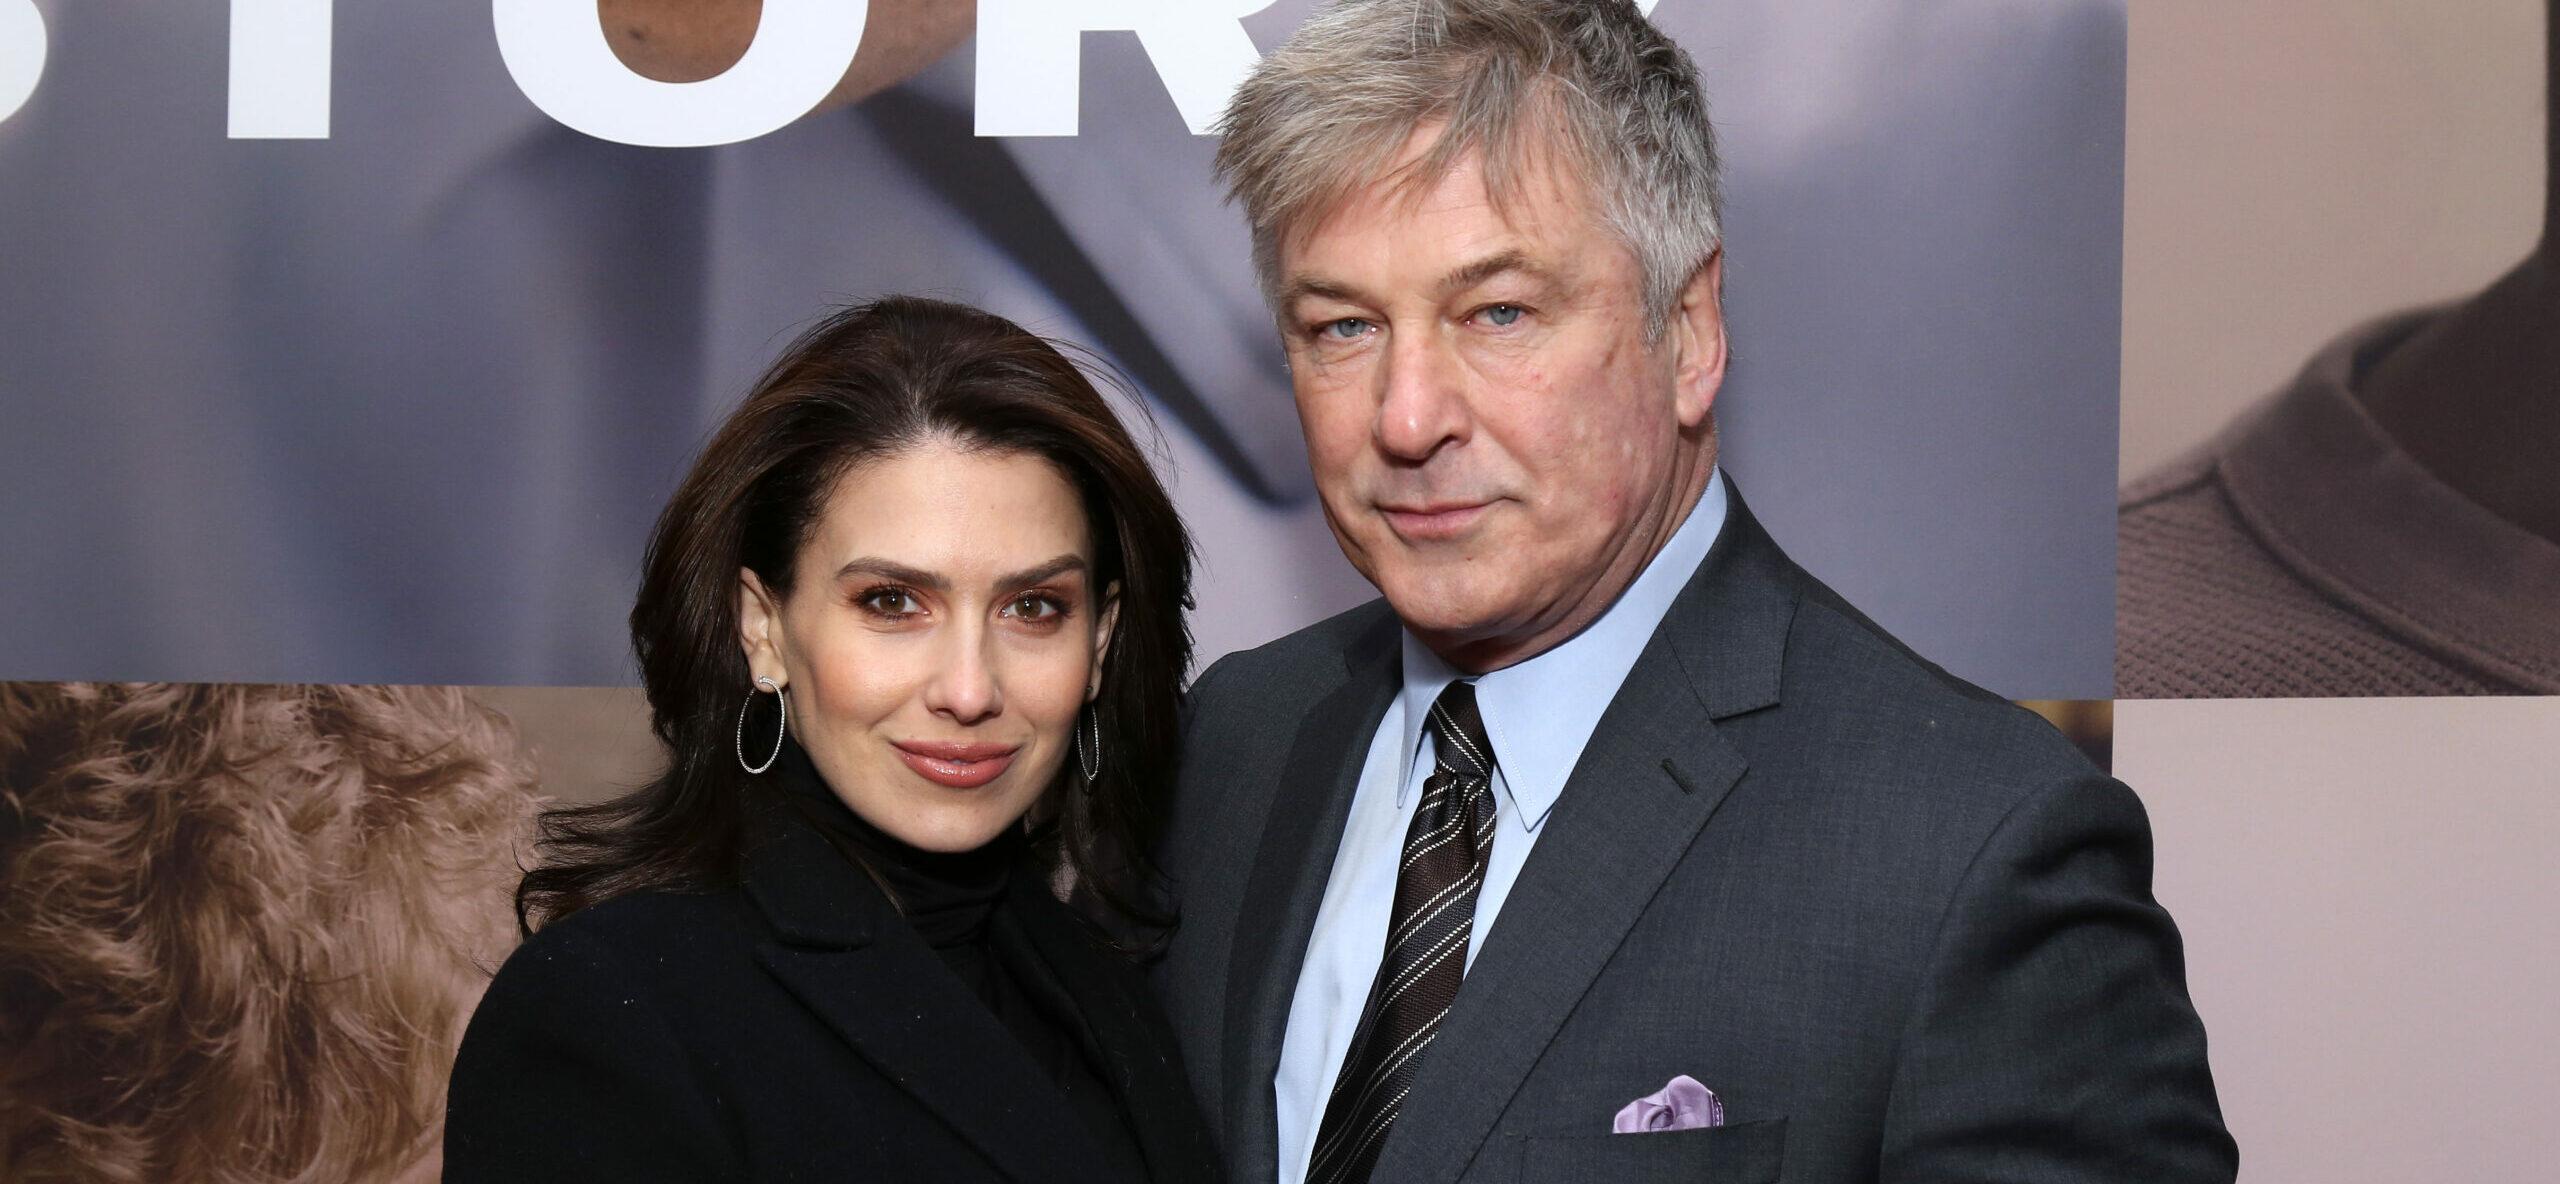 Hilaria Baldwin Shares Epic Fail Thanksgiving Photo With Her 7 Kids